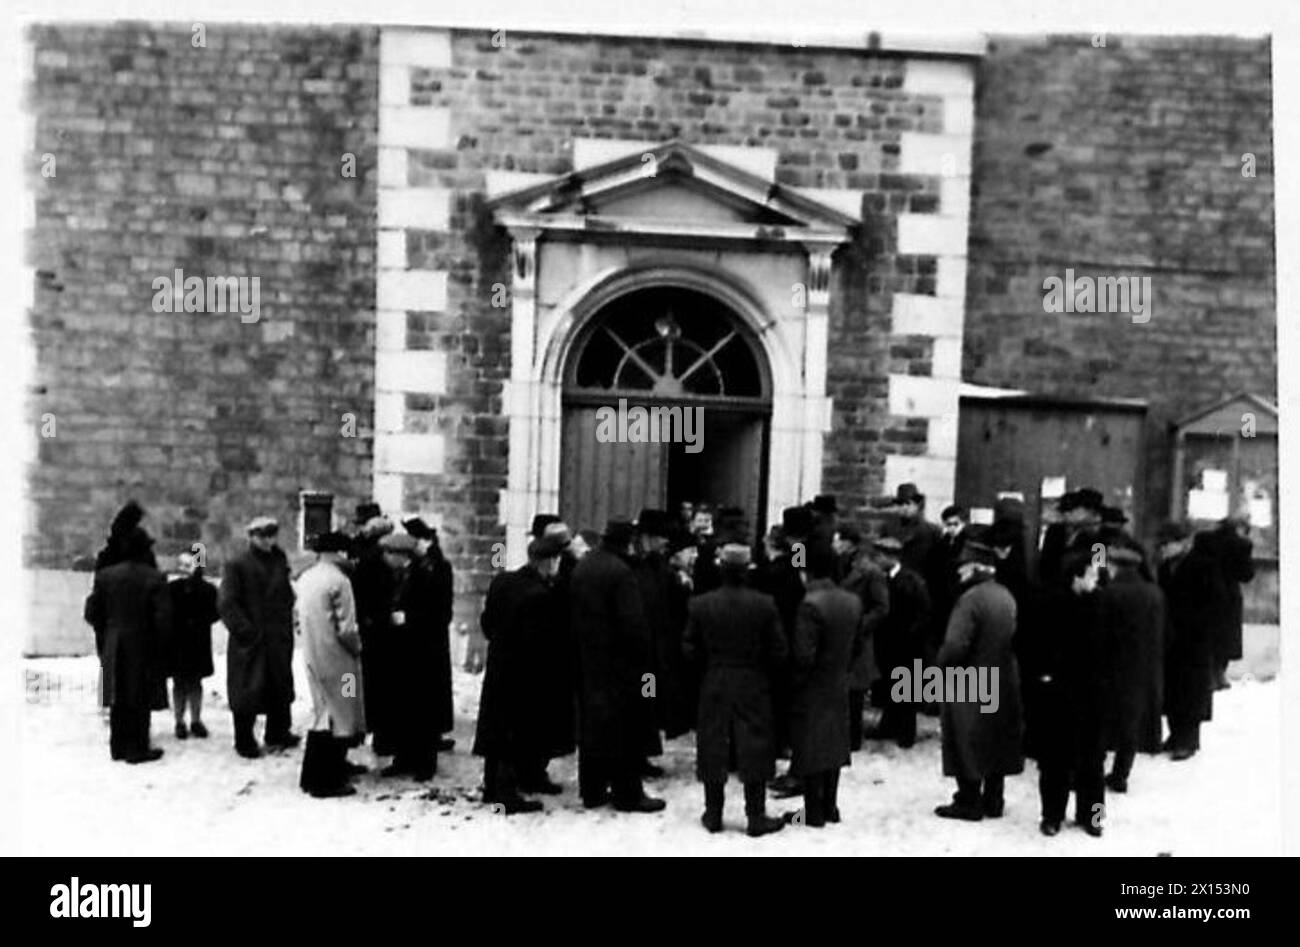 BURIAL OF NAZIS' VICTIMS - Heartbroken parents coming out of the church British Army, 21st Army Group Stock Photo